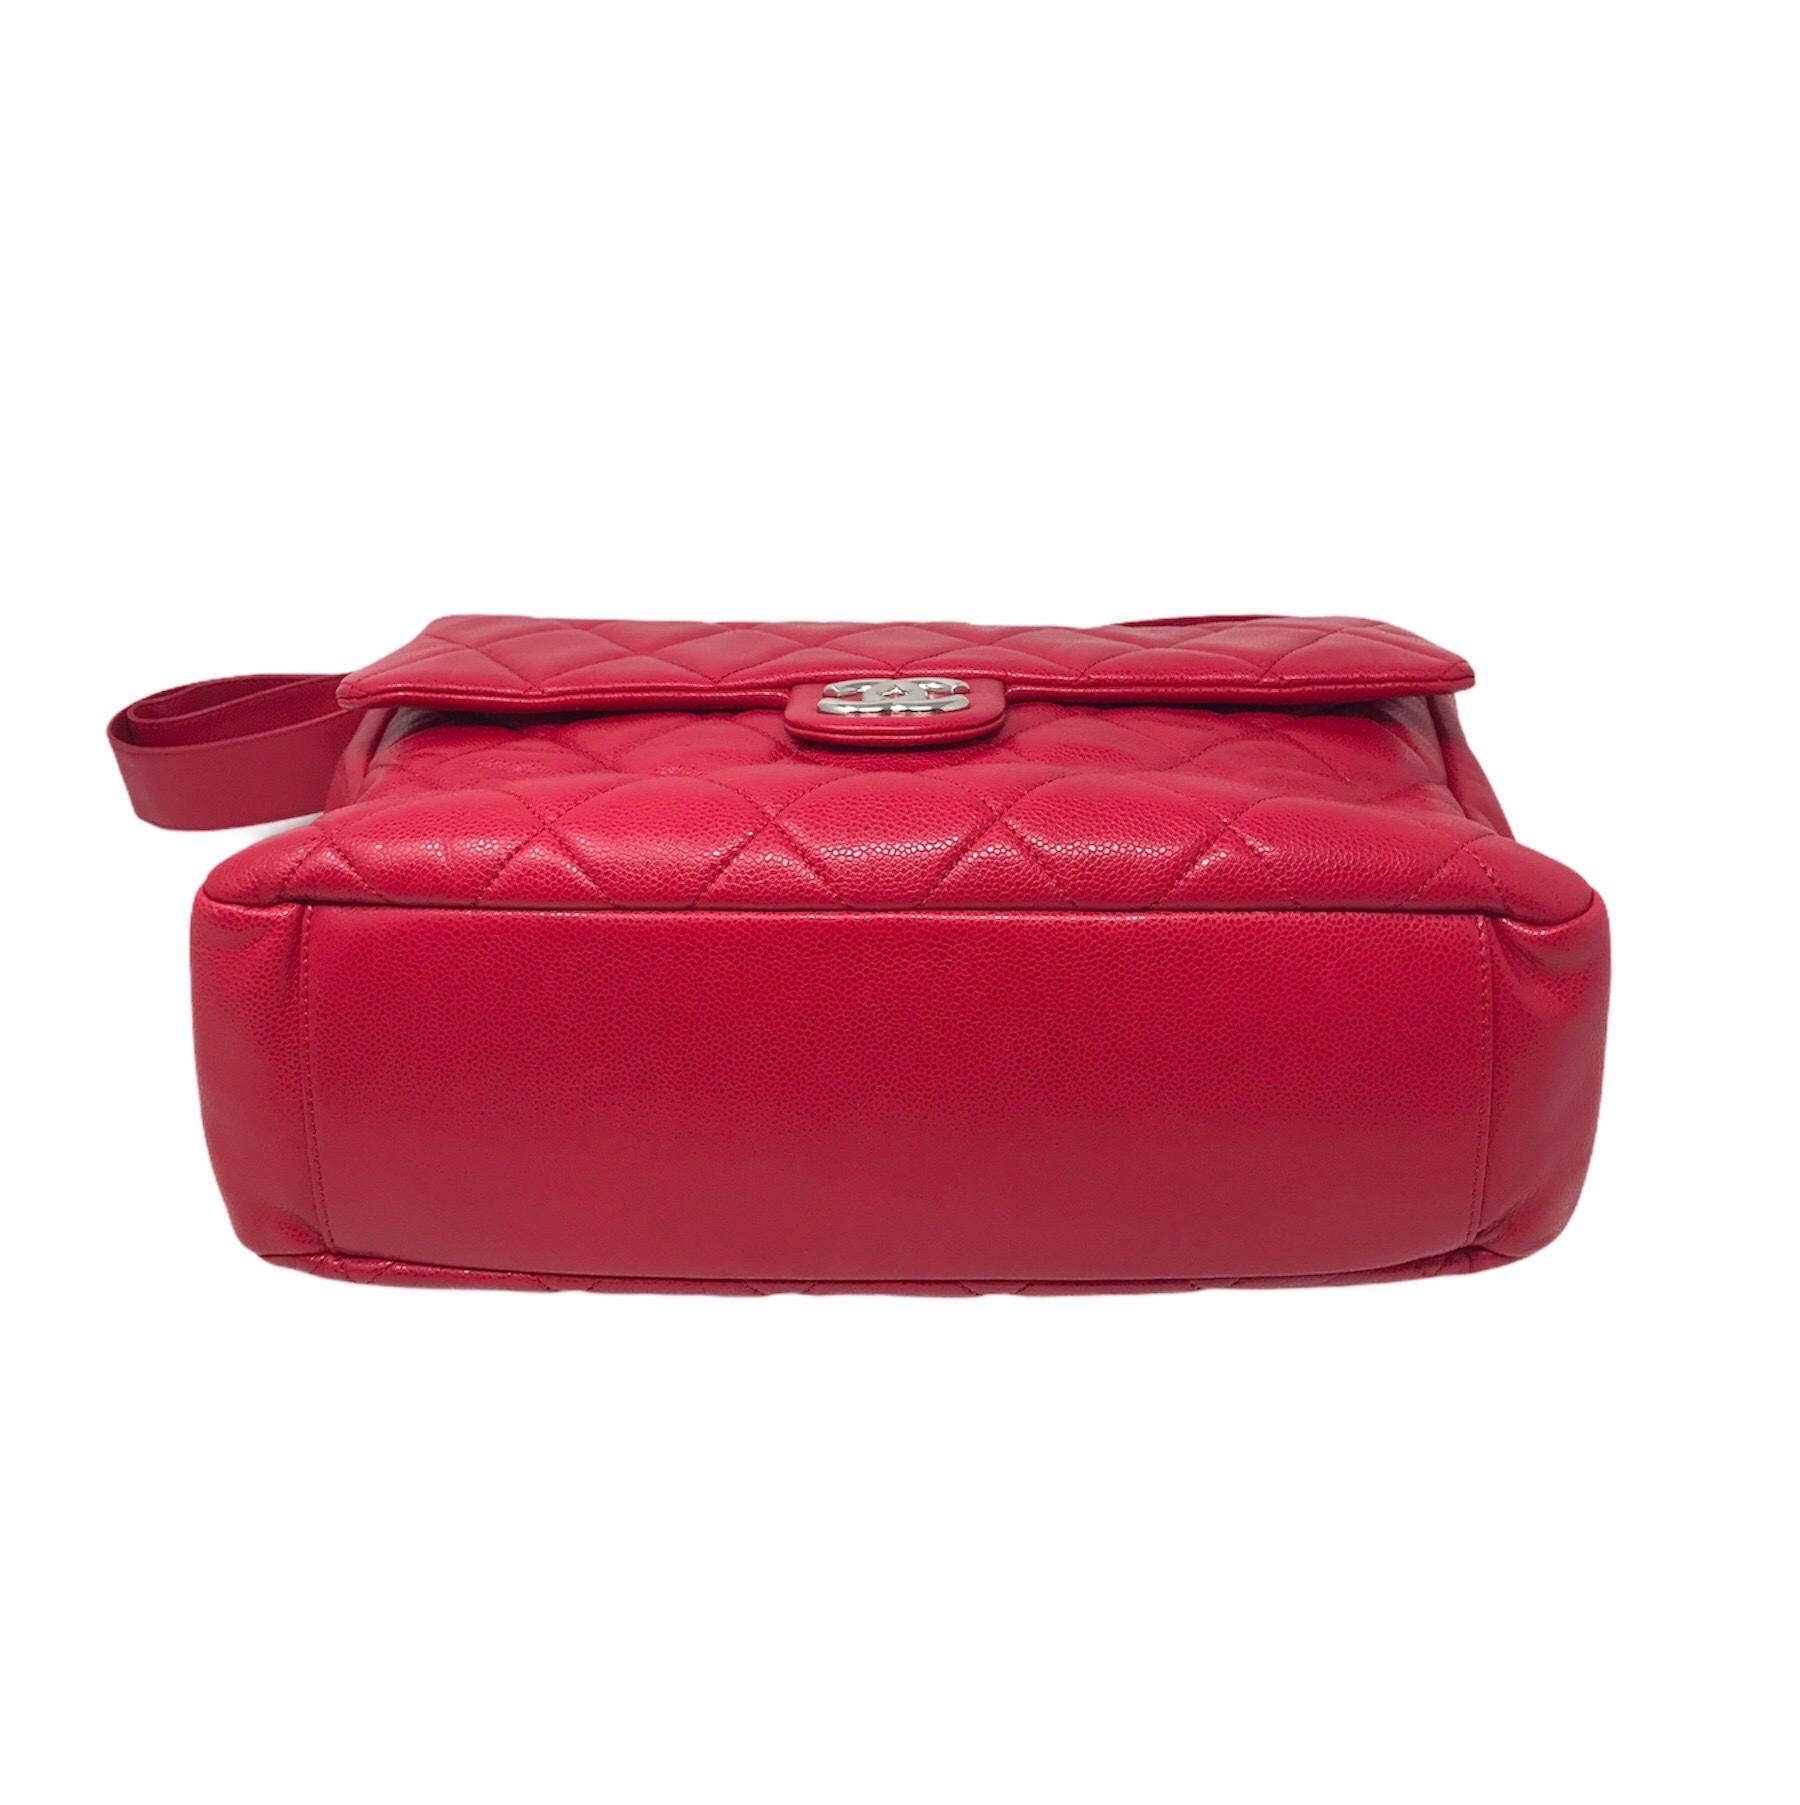 Red CHANEL:  Timeless/Classique Leather Bag For Sale